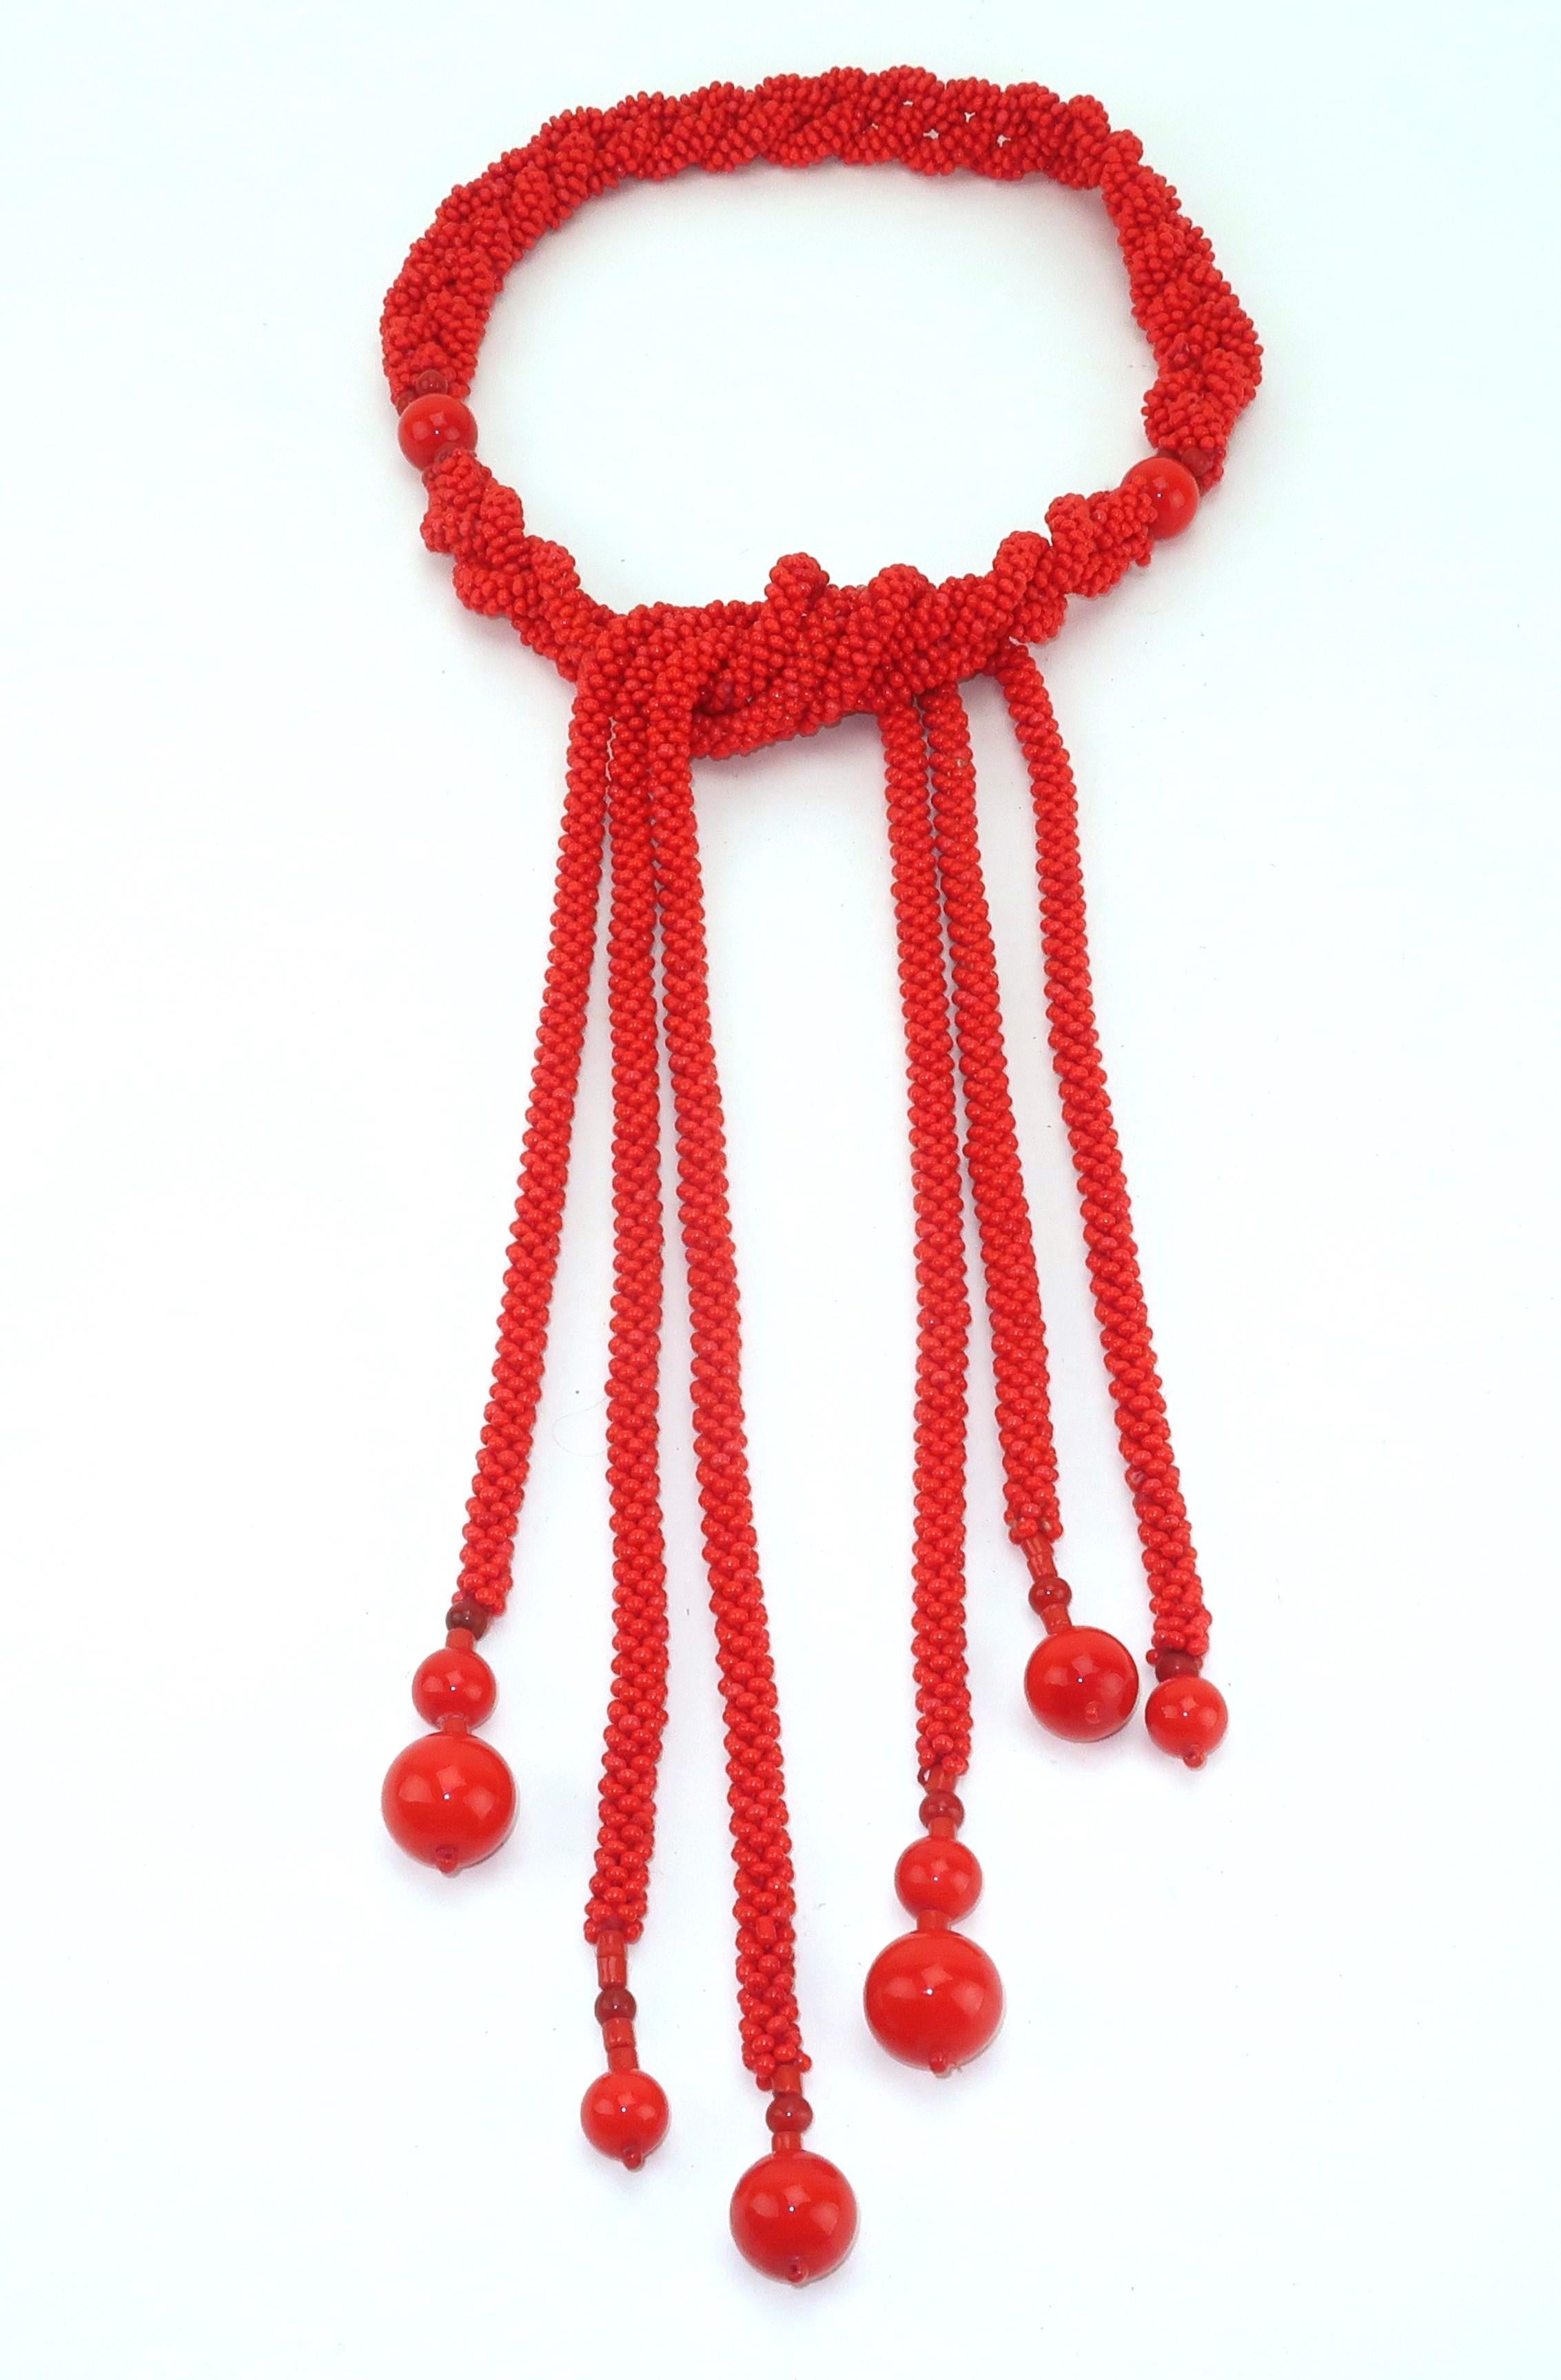 Vintage glass bead braid belt in a bright shade reminiscent of red coral.  The belt can be looped at the waist for an exotic bohemian look.  It can also be worn as a lariat style necklace.  No maker's mark though beautifully made.  From the Atlanta